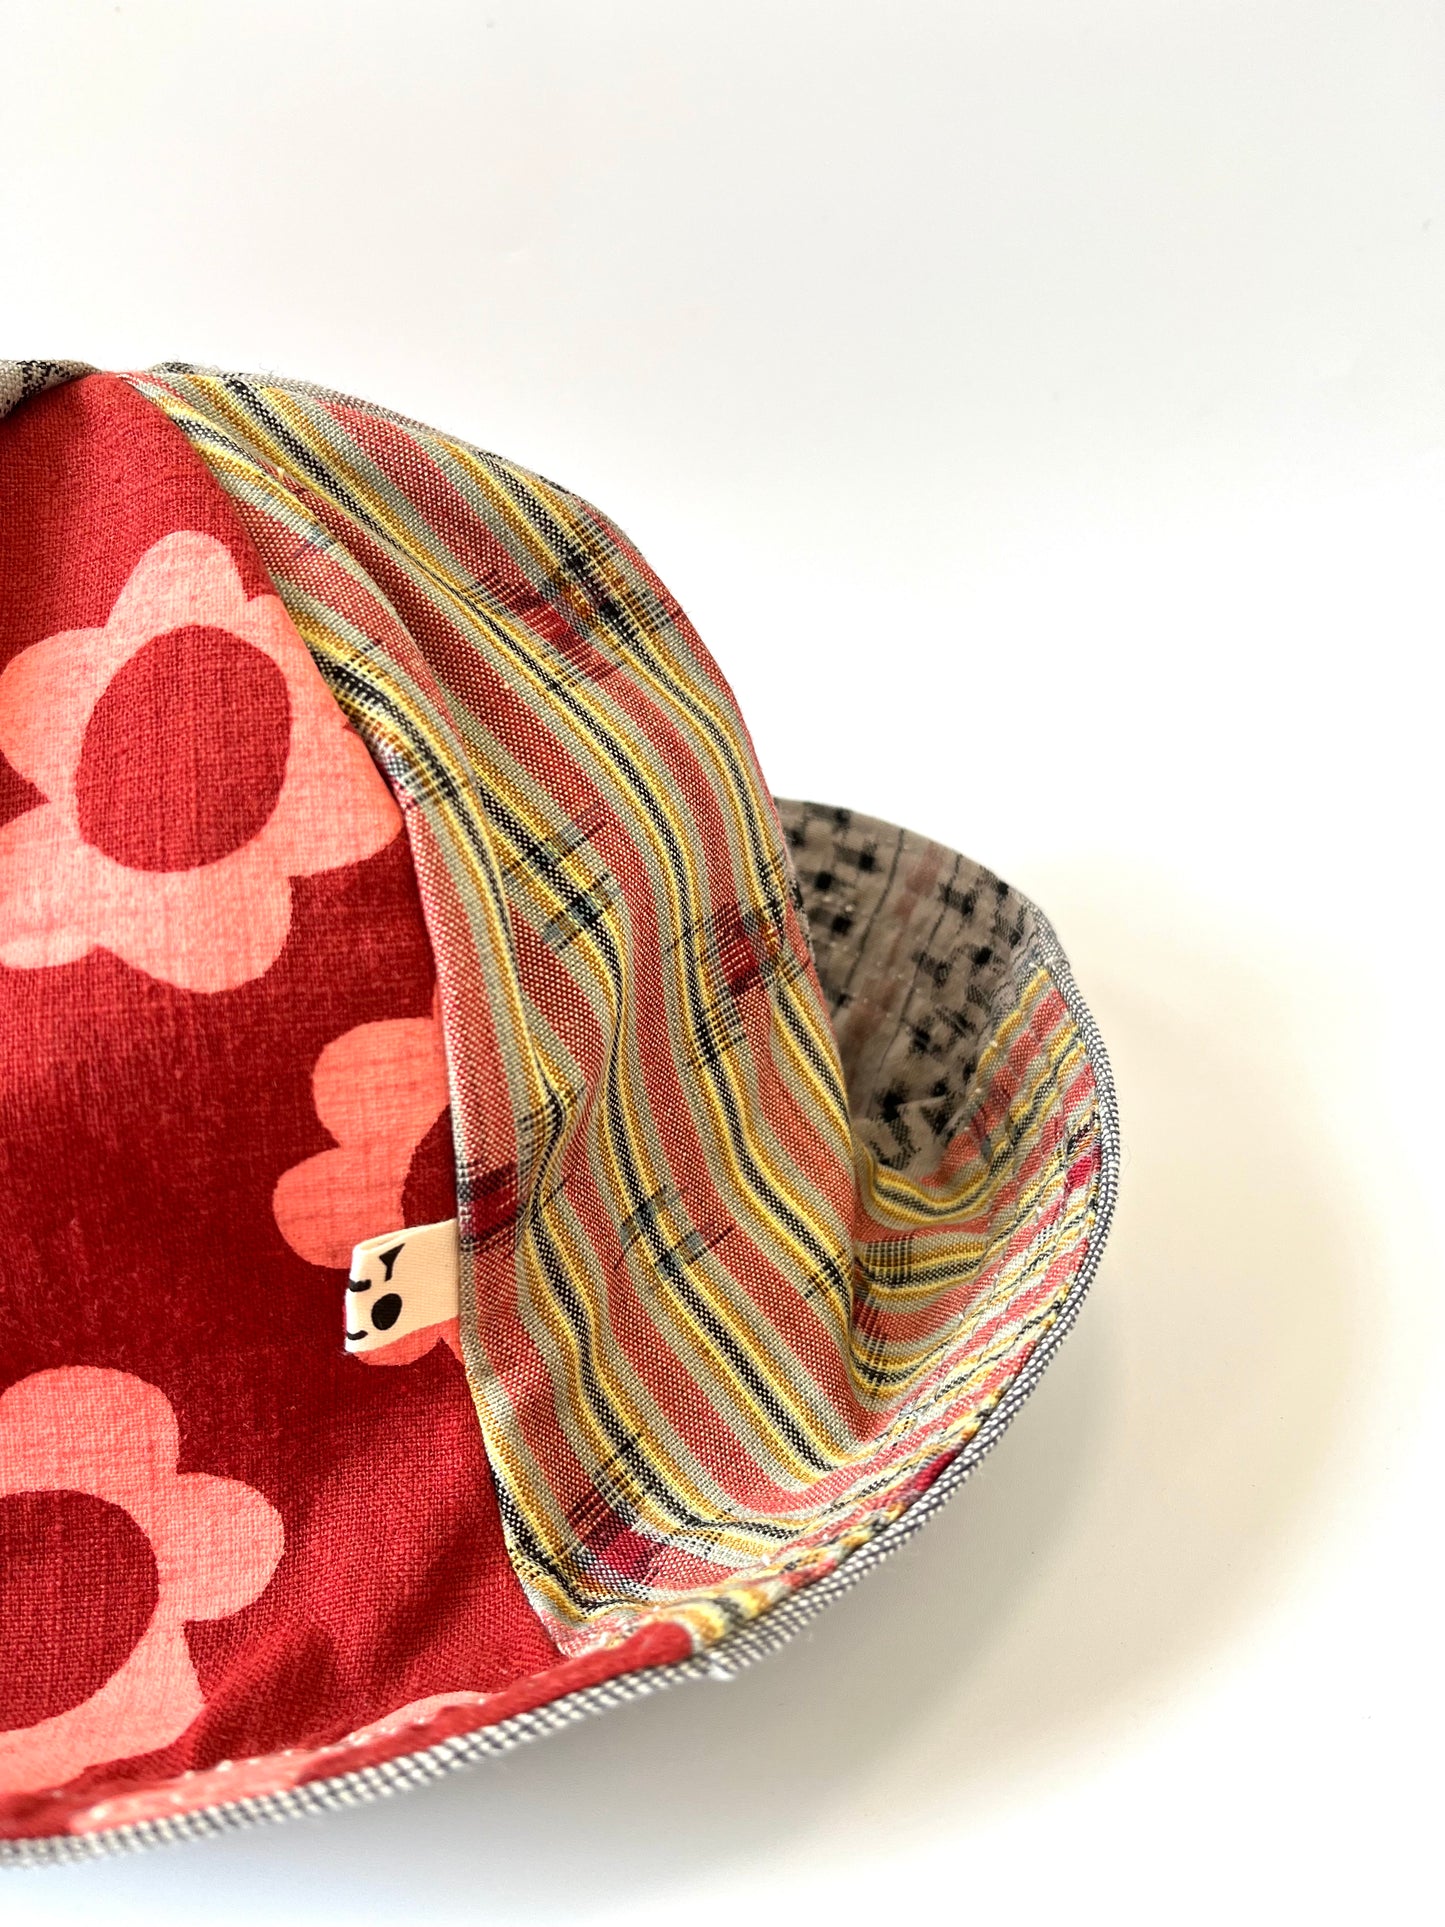 Reversible Sunhat - Coral Flowers, Red & Grey Patterned